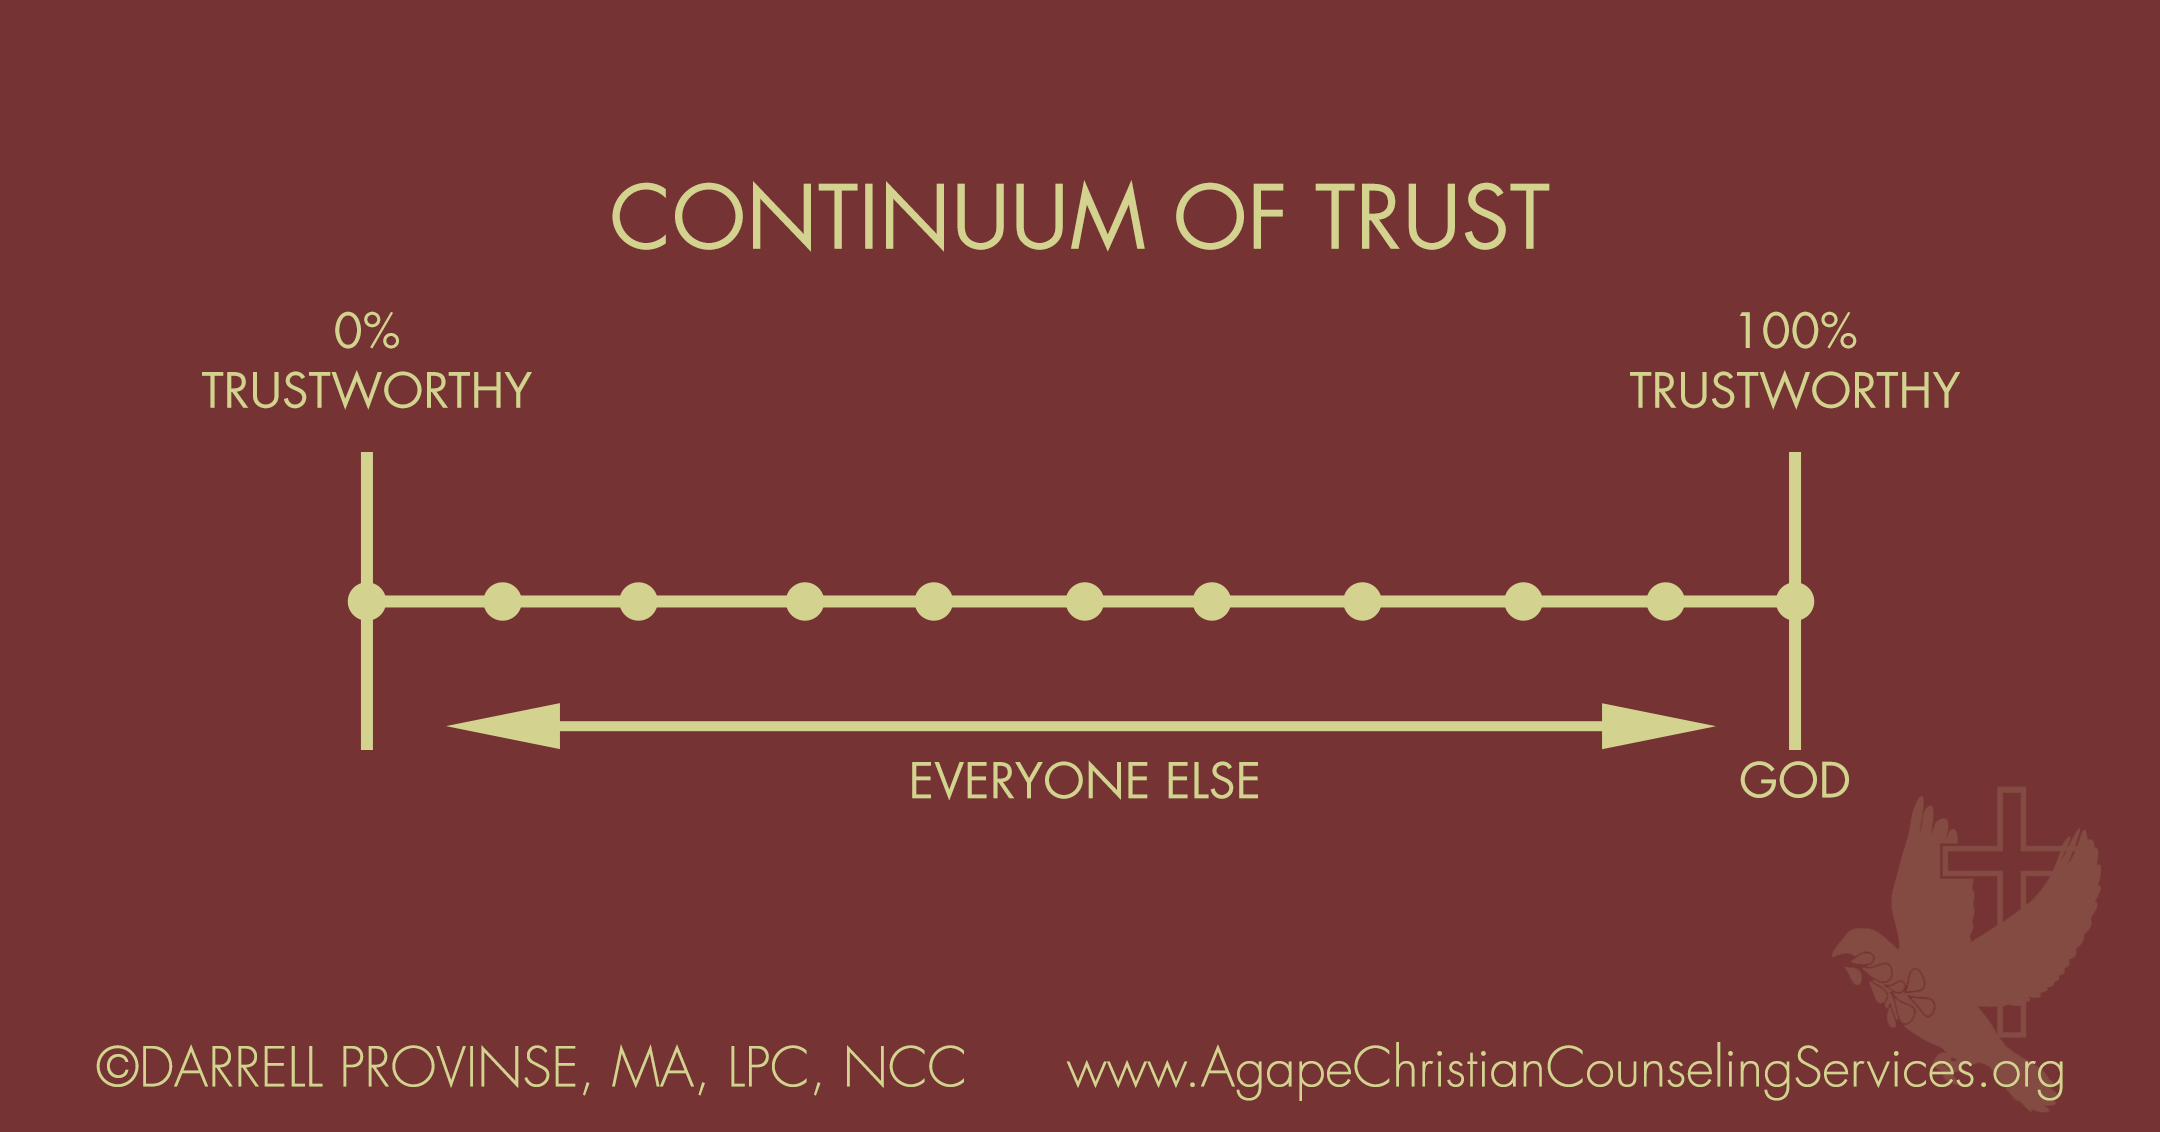 Continuum of Trust - it's important to realize that only God is 100% trustworthy. Everyone else falls on a continuum...